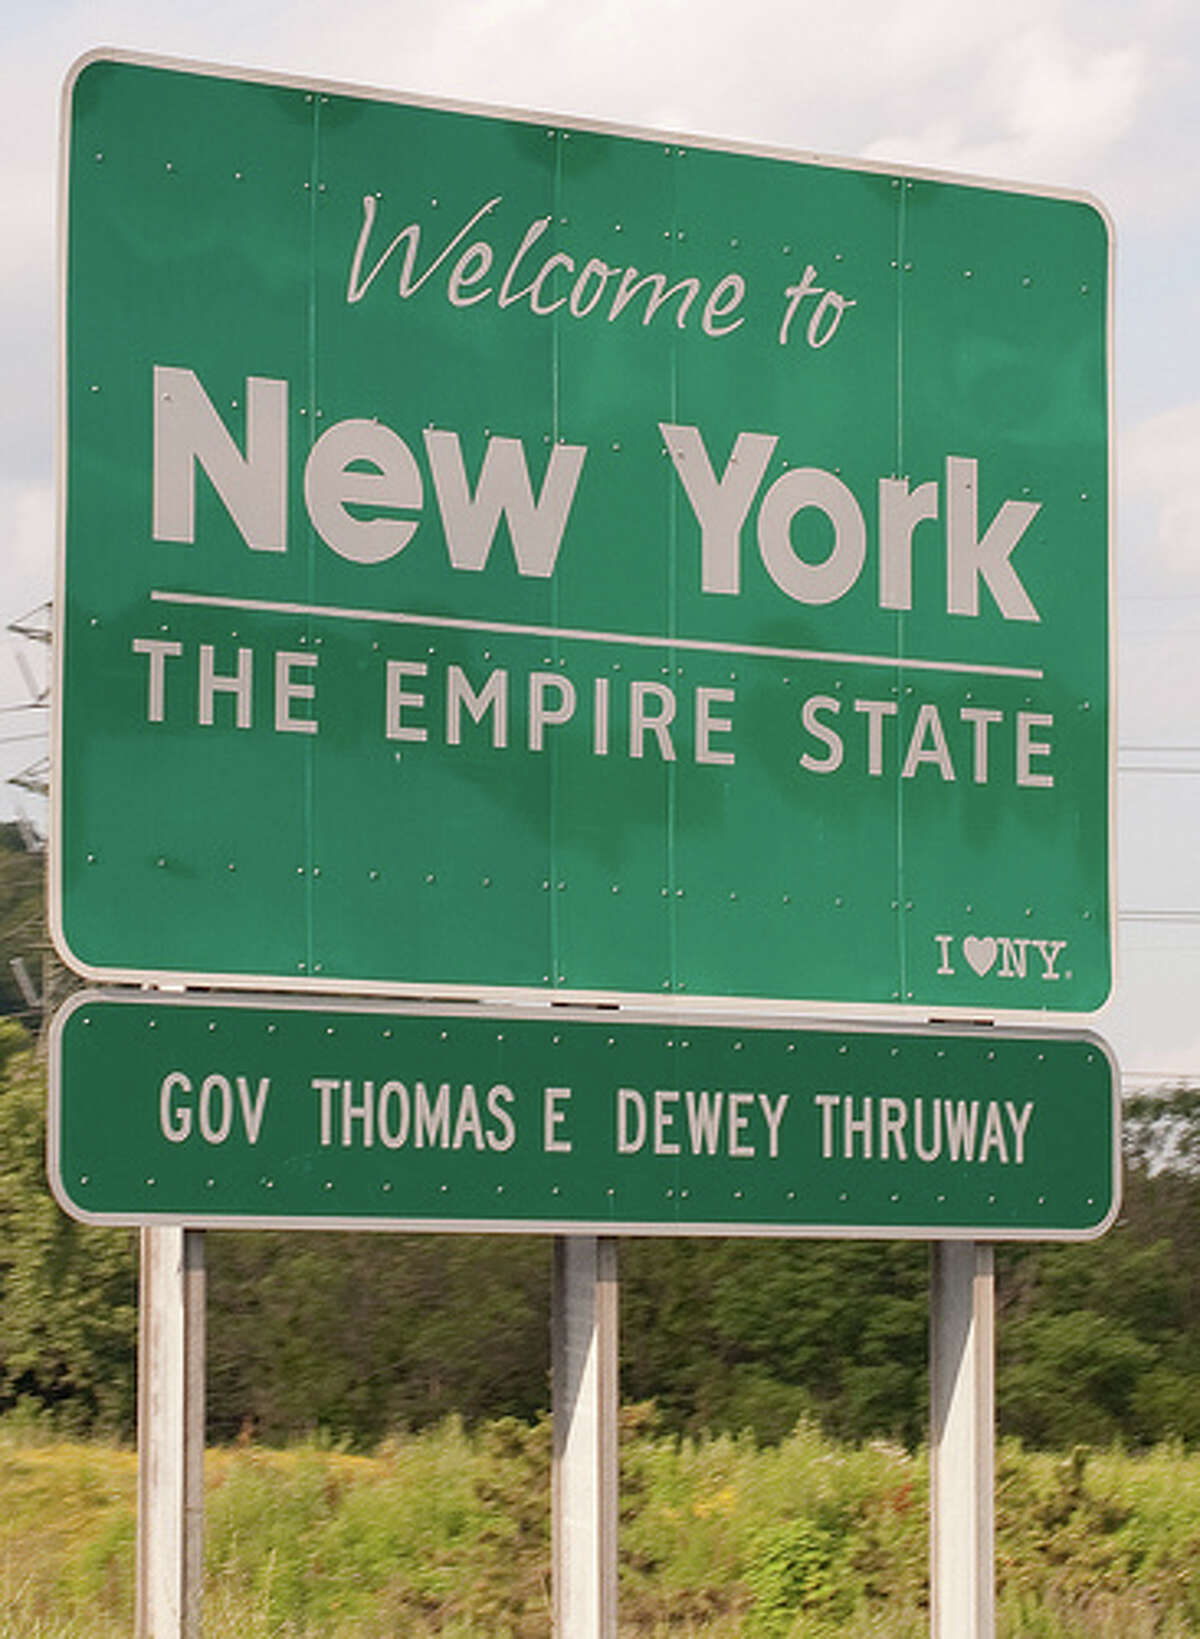 New York: The state was given a green rating by Road Map to State Highway Safety laws report. The report gave the state a rating of 13 out of 15, ranking it among the 14 best states. (Photo: deltaMike, Flickr)